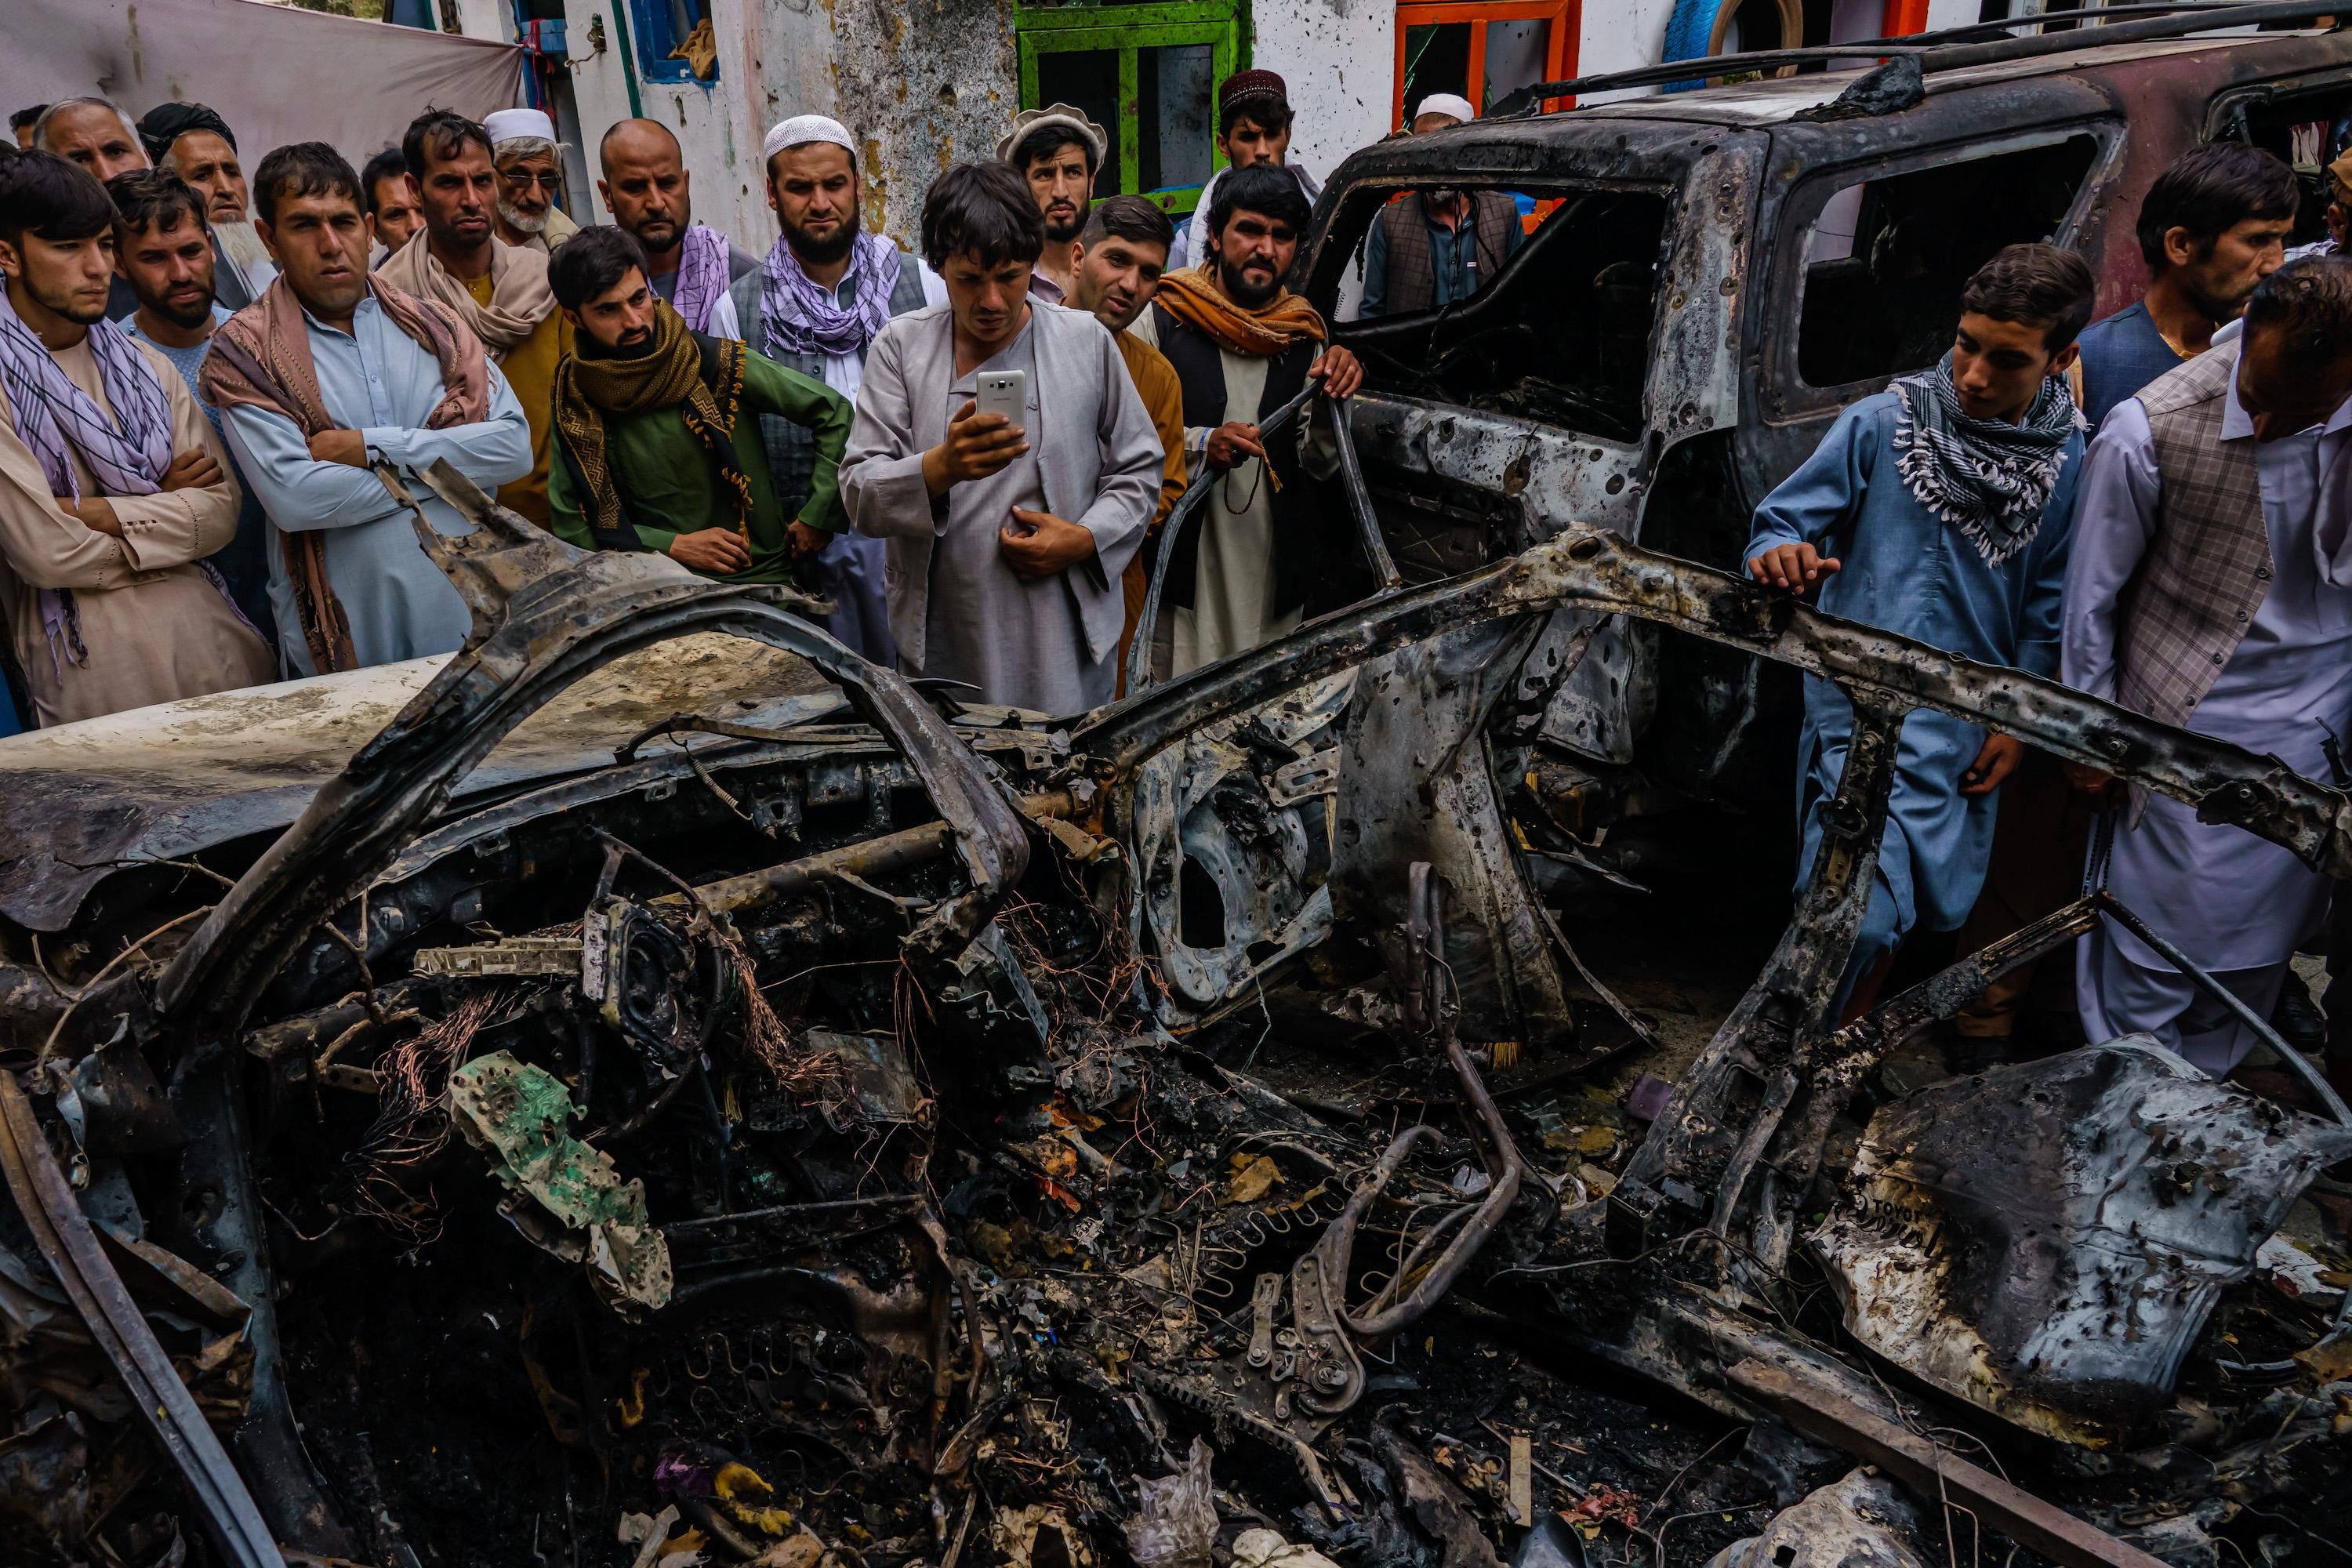 Relatives and neighbors of the Ahmadi family gathered around the incinerated husk of a vehicle hit by a U.S. drone strike in Kabul